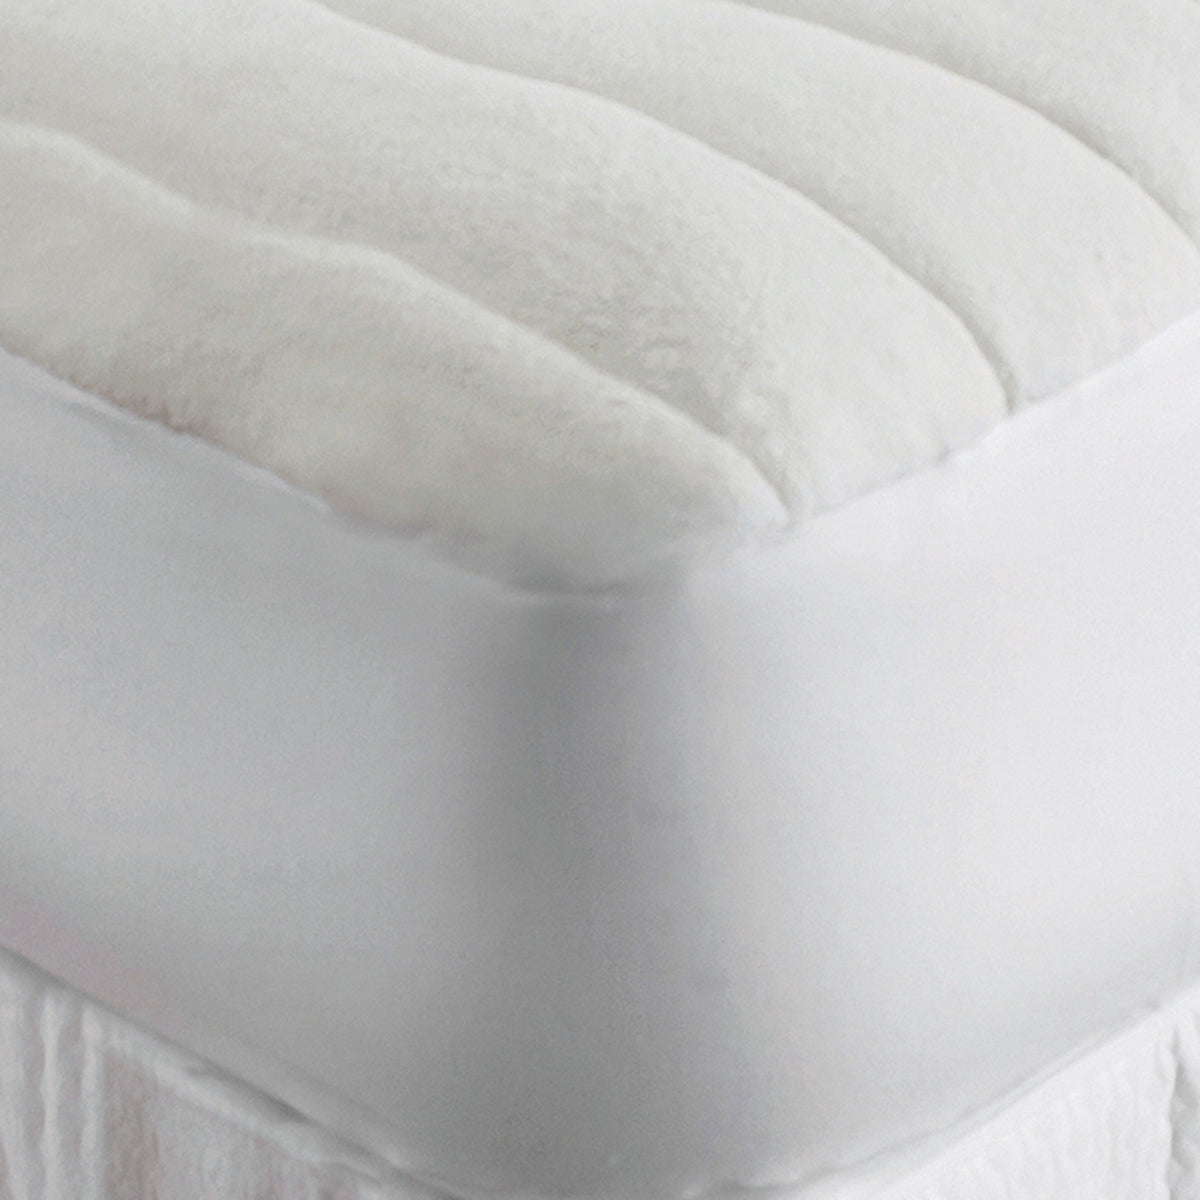 Closeup Image of Downtown Company Comfort Mattress Pad in Color Natural